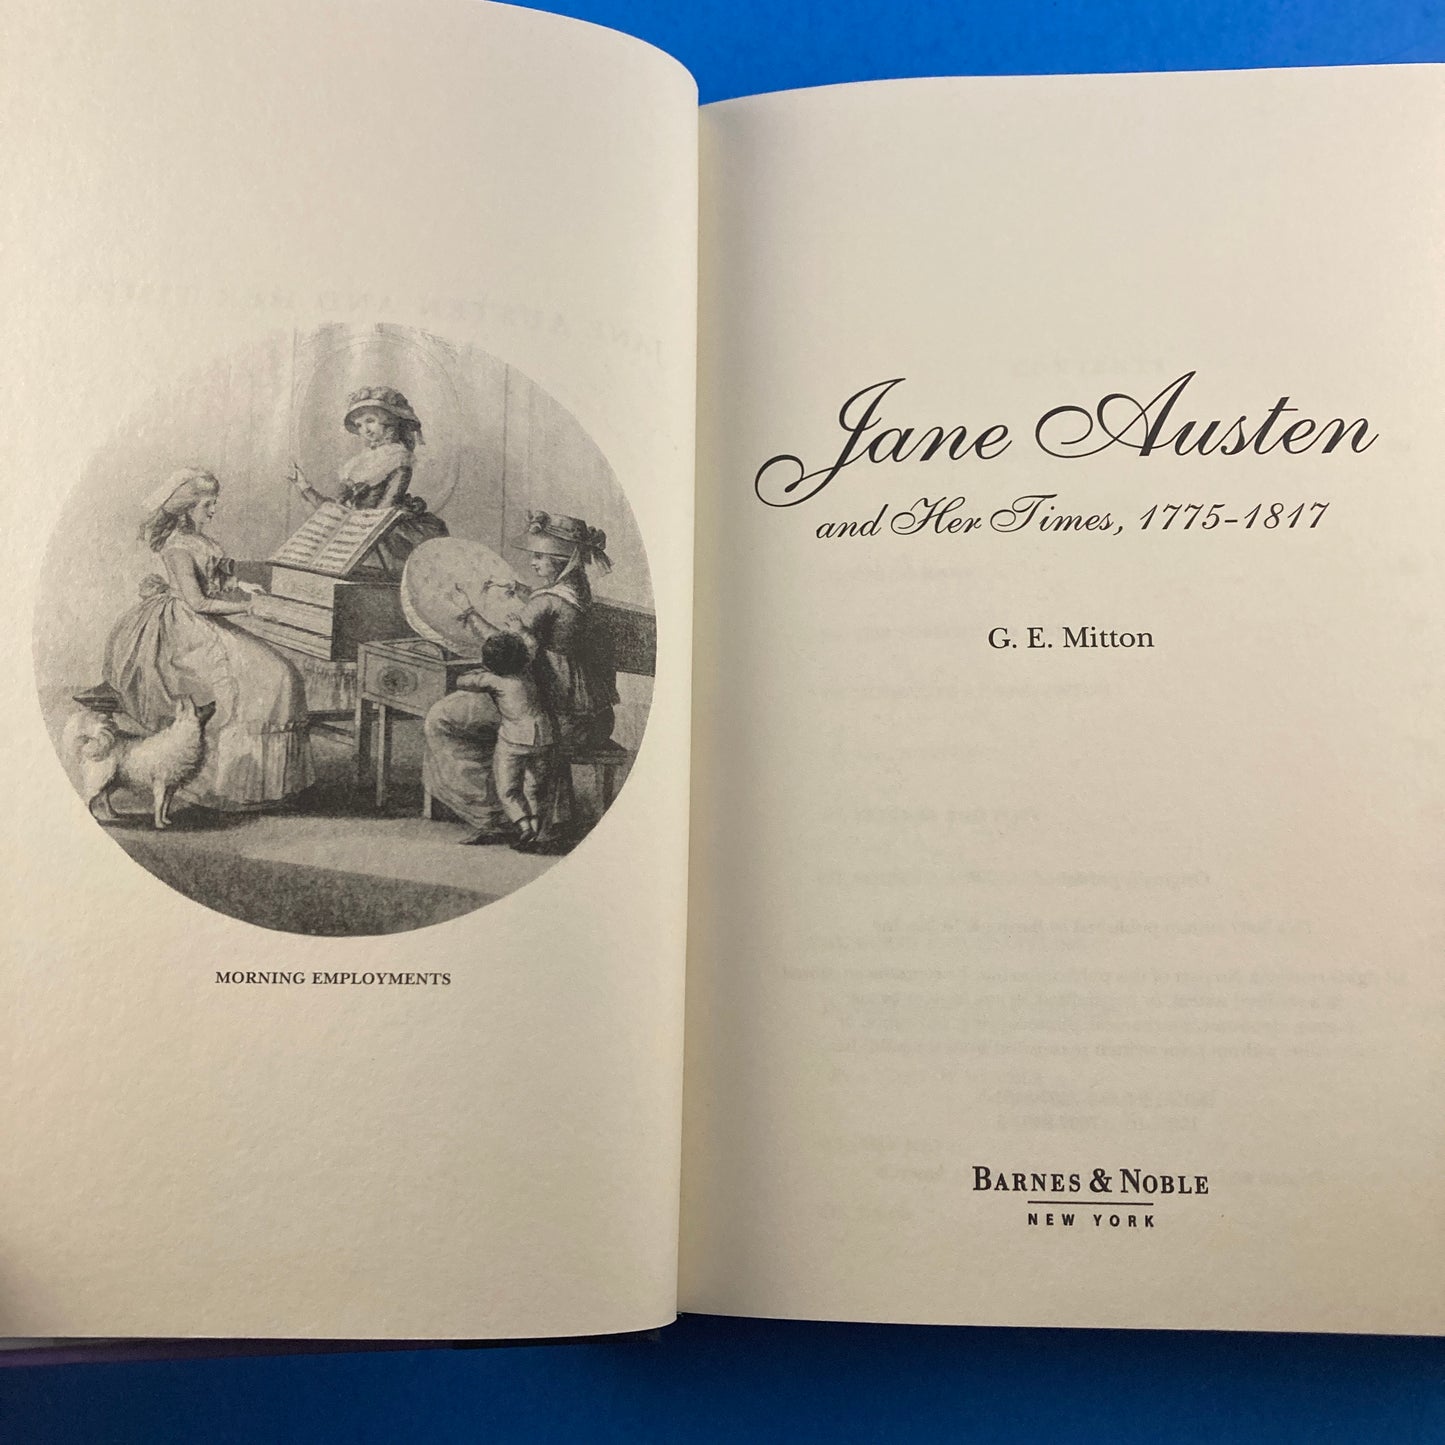 Jane Austen and Her Times, 1775-1817